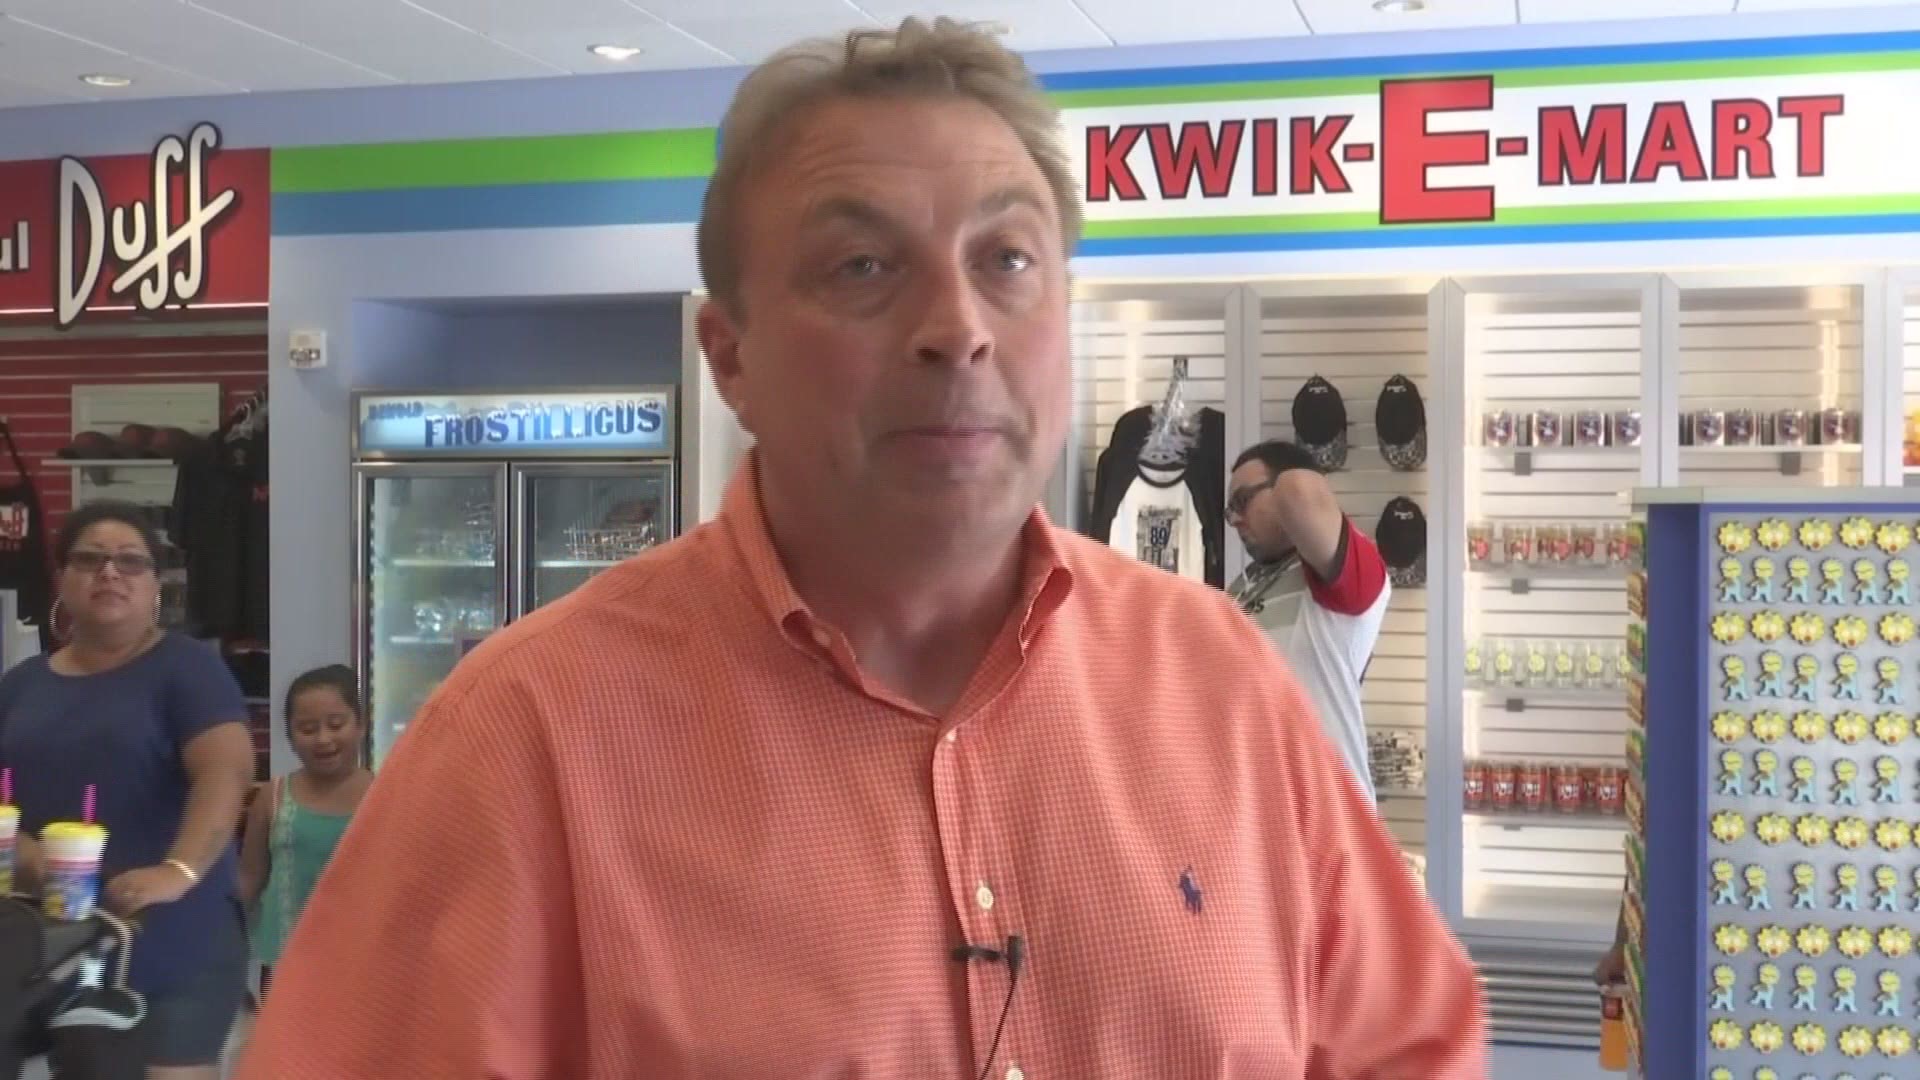 Kwik-E-Mart From 'The Simpsons' Opens in Myrtle Beach